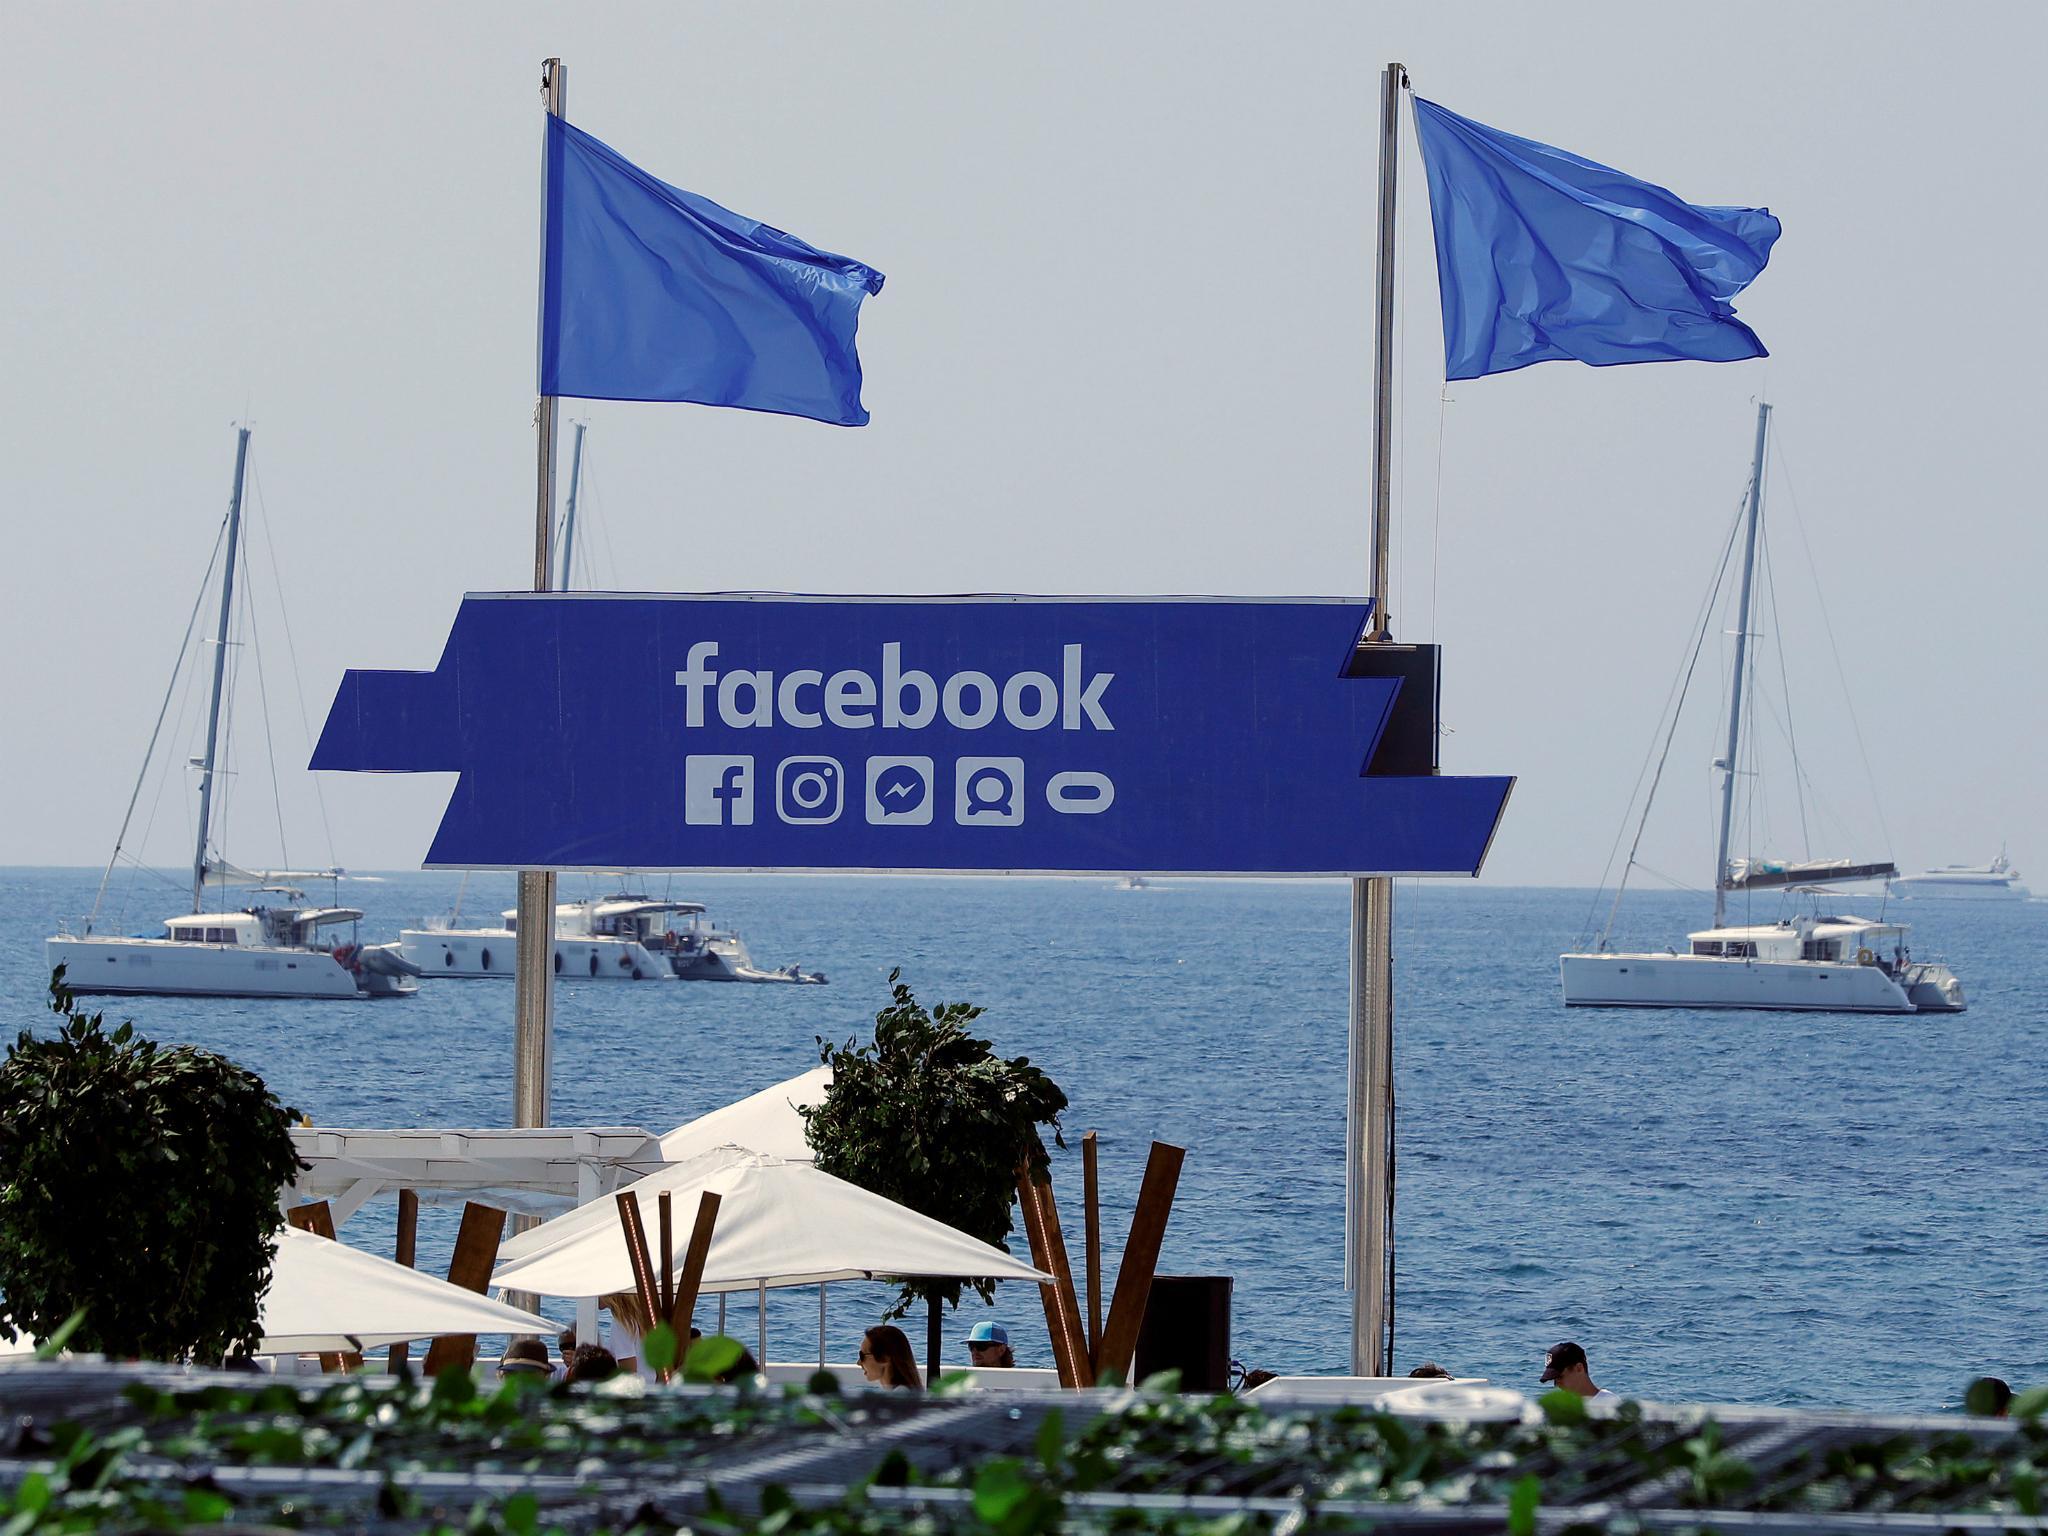 The logo of the social network Facebook is seen on a beach during the Cannes Lions in Cannes, France, June 21, 2017